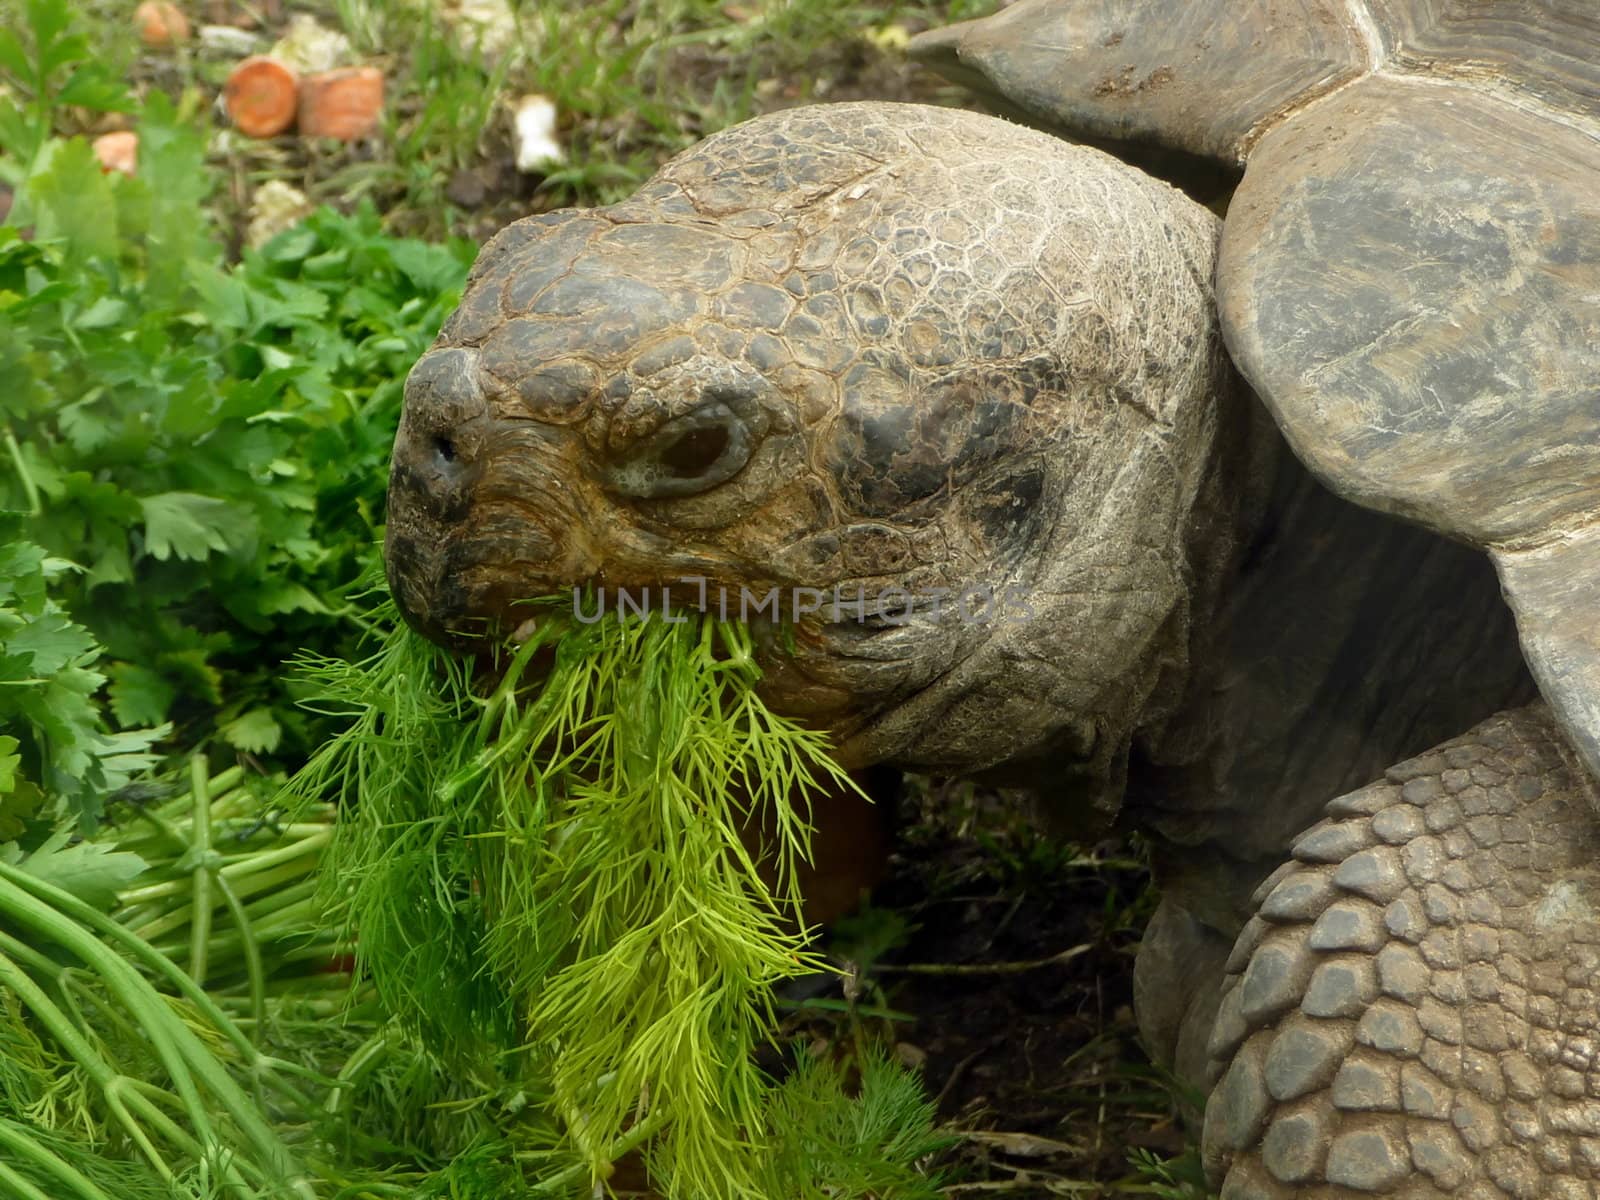 Turtle eats grass by tomatto